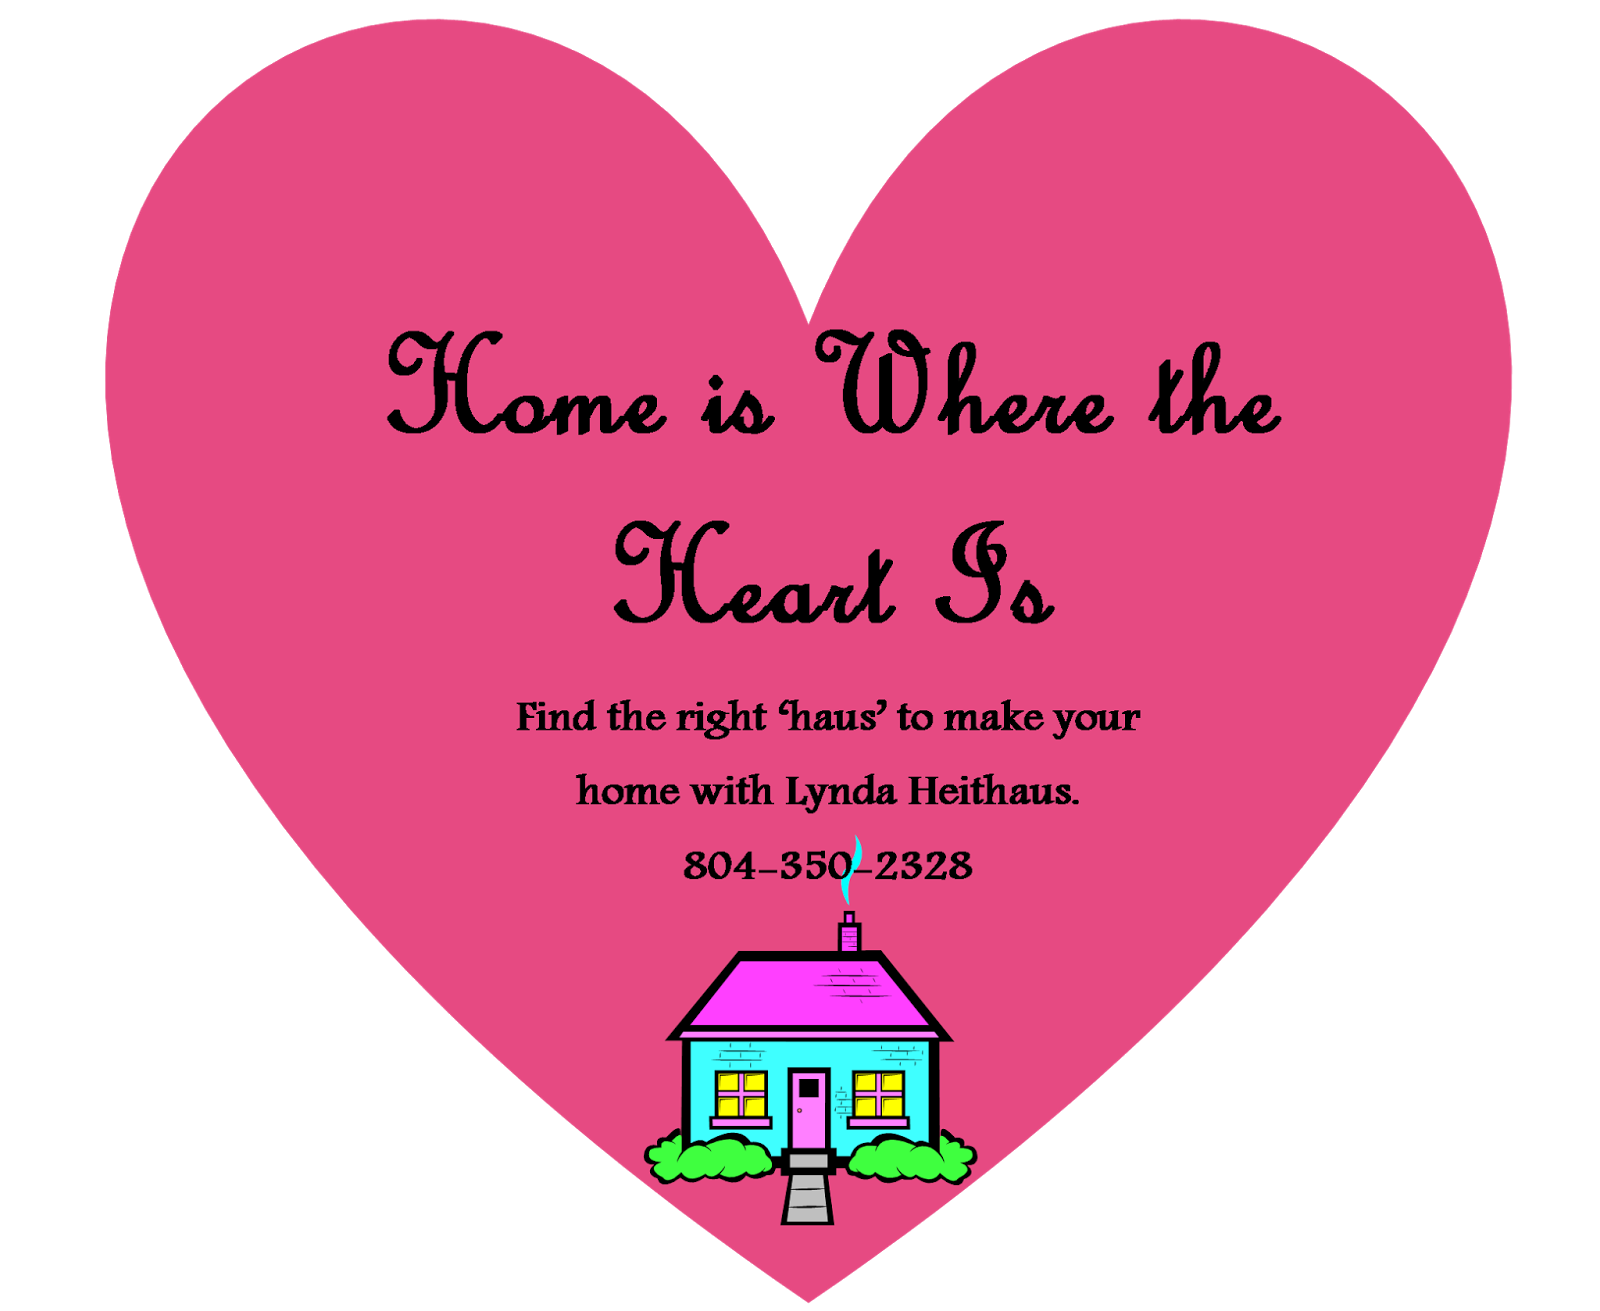 Valentine's Day Heart from Lynda Heithaus, Real Estate agent in Chesterfield VA